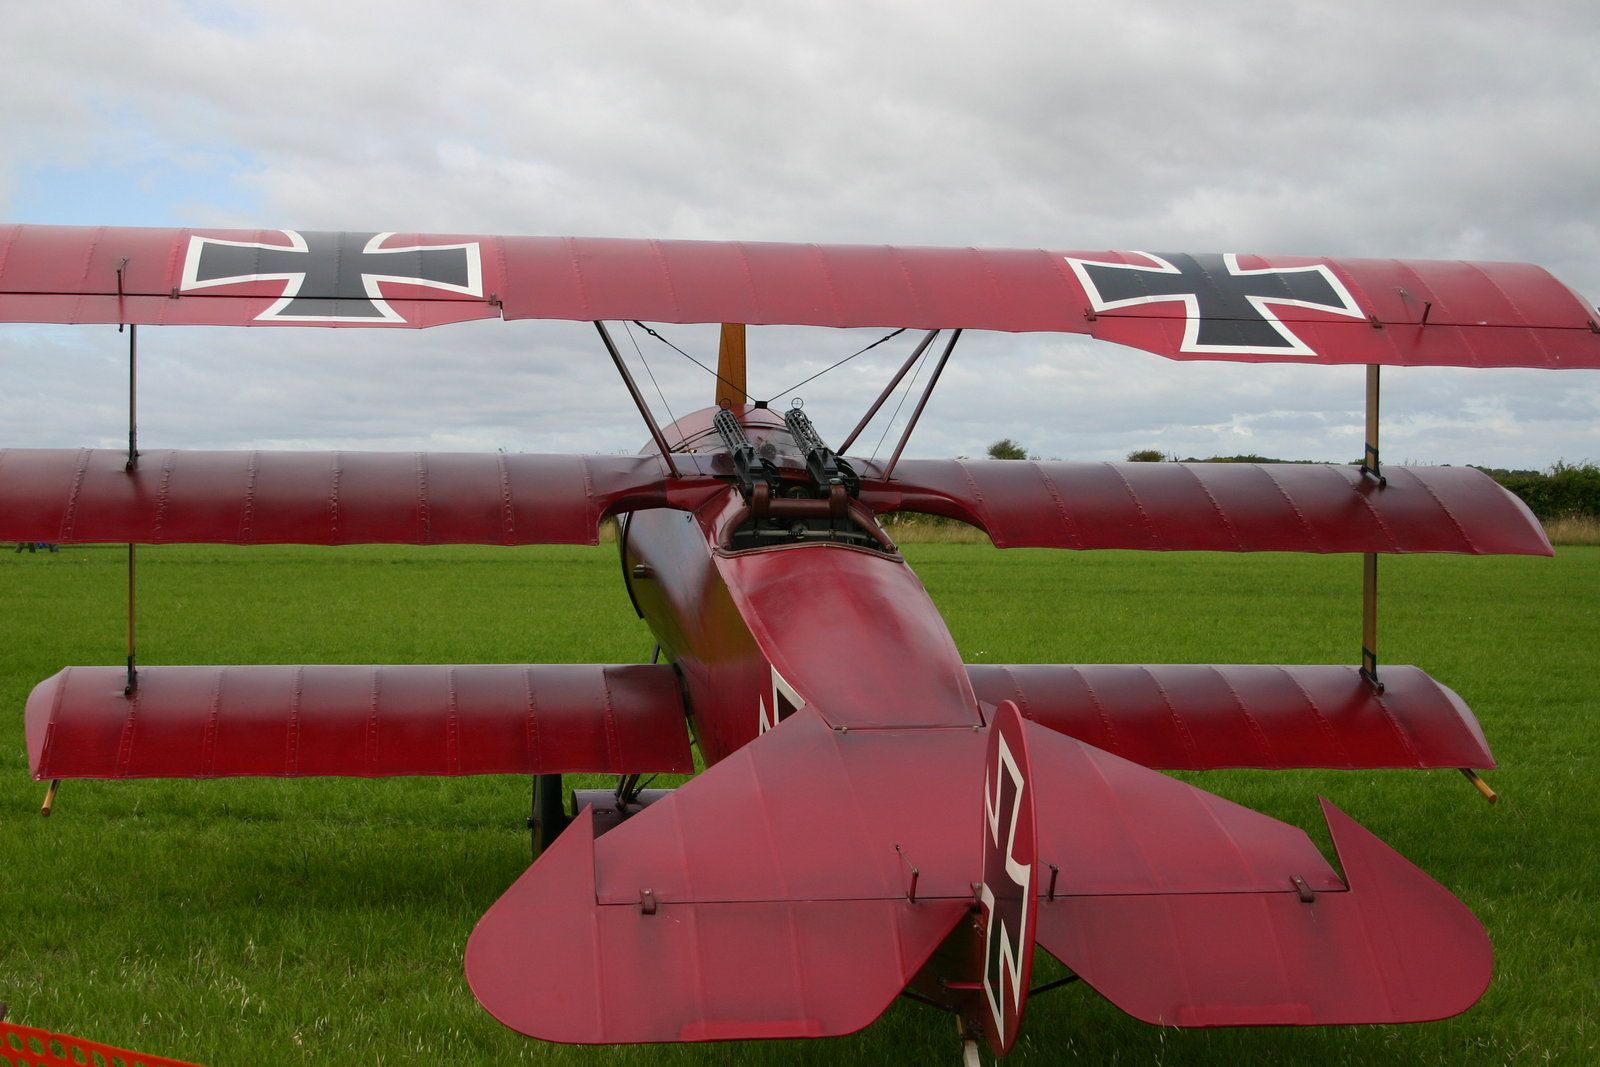 red baron FOK DR1 477 b by Sceptre63 on DeviantArt